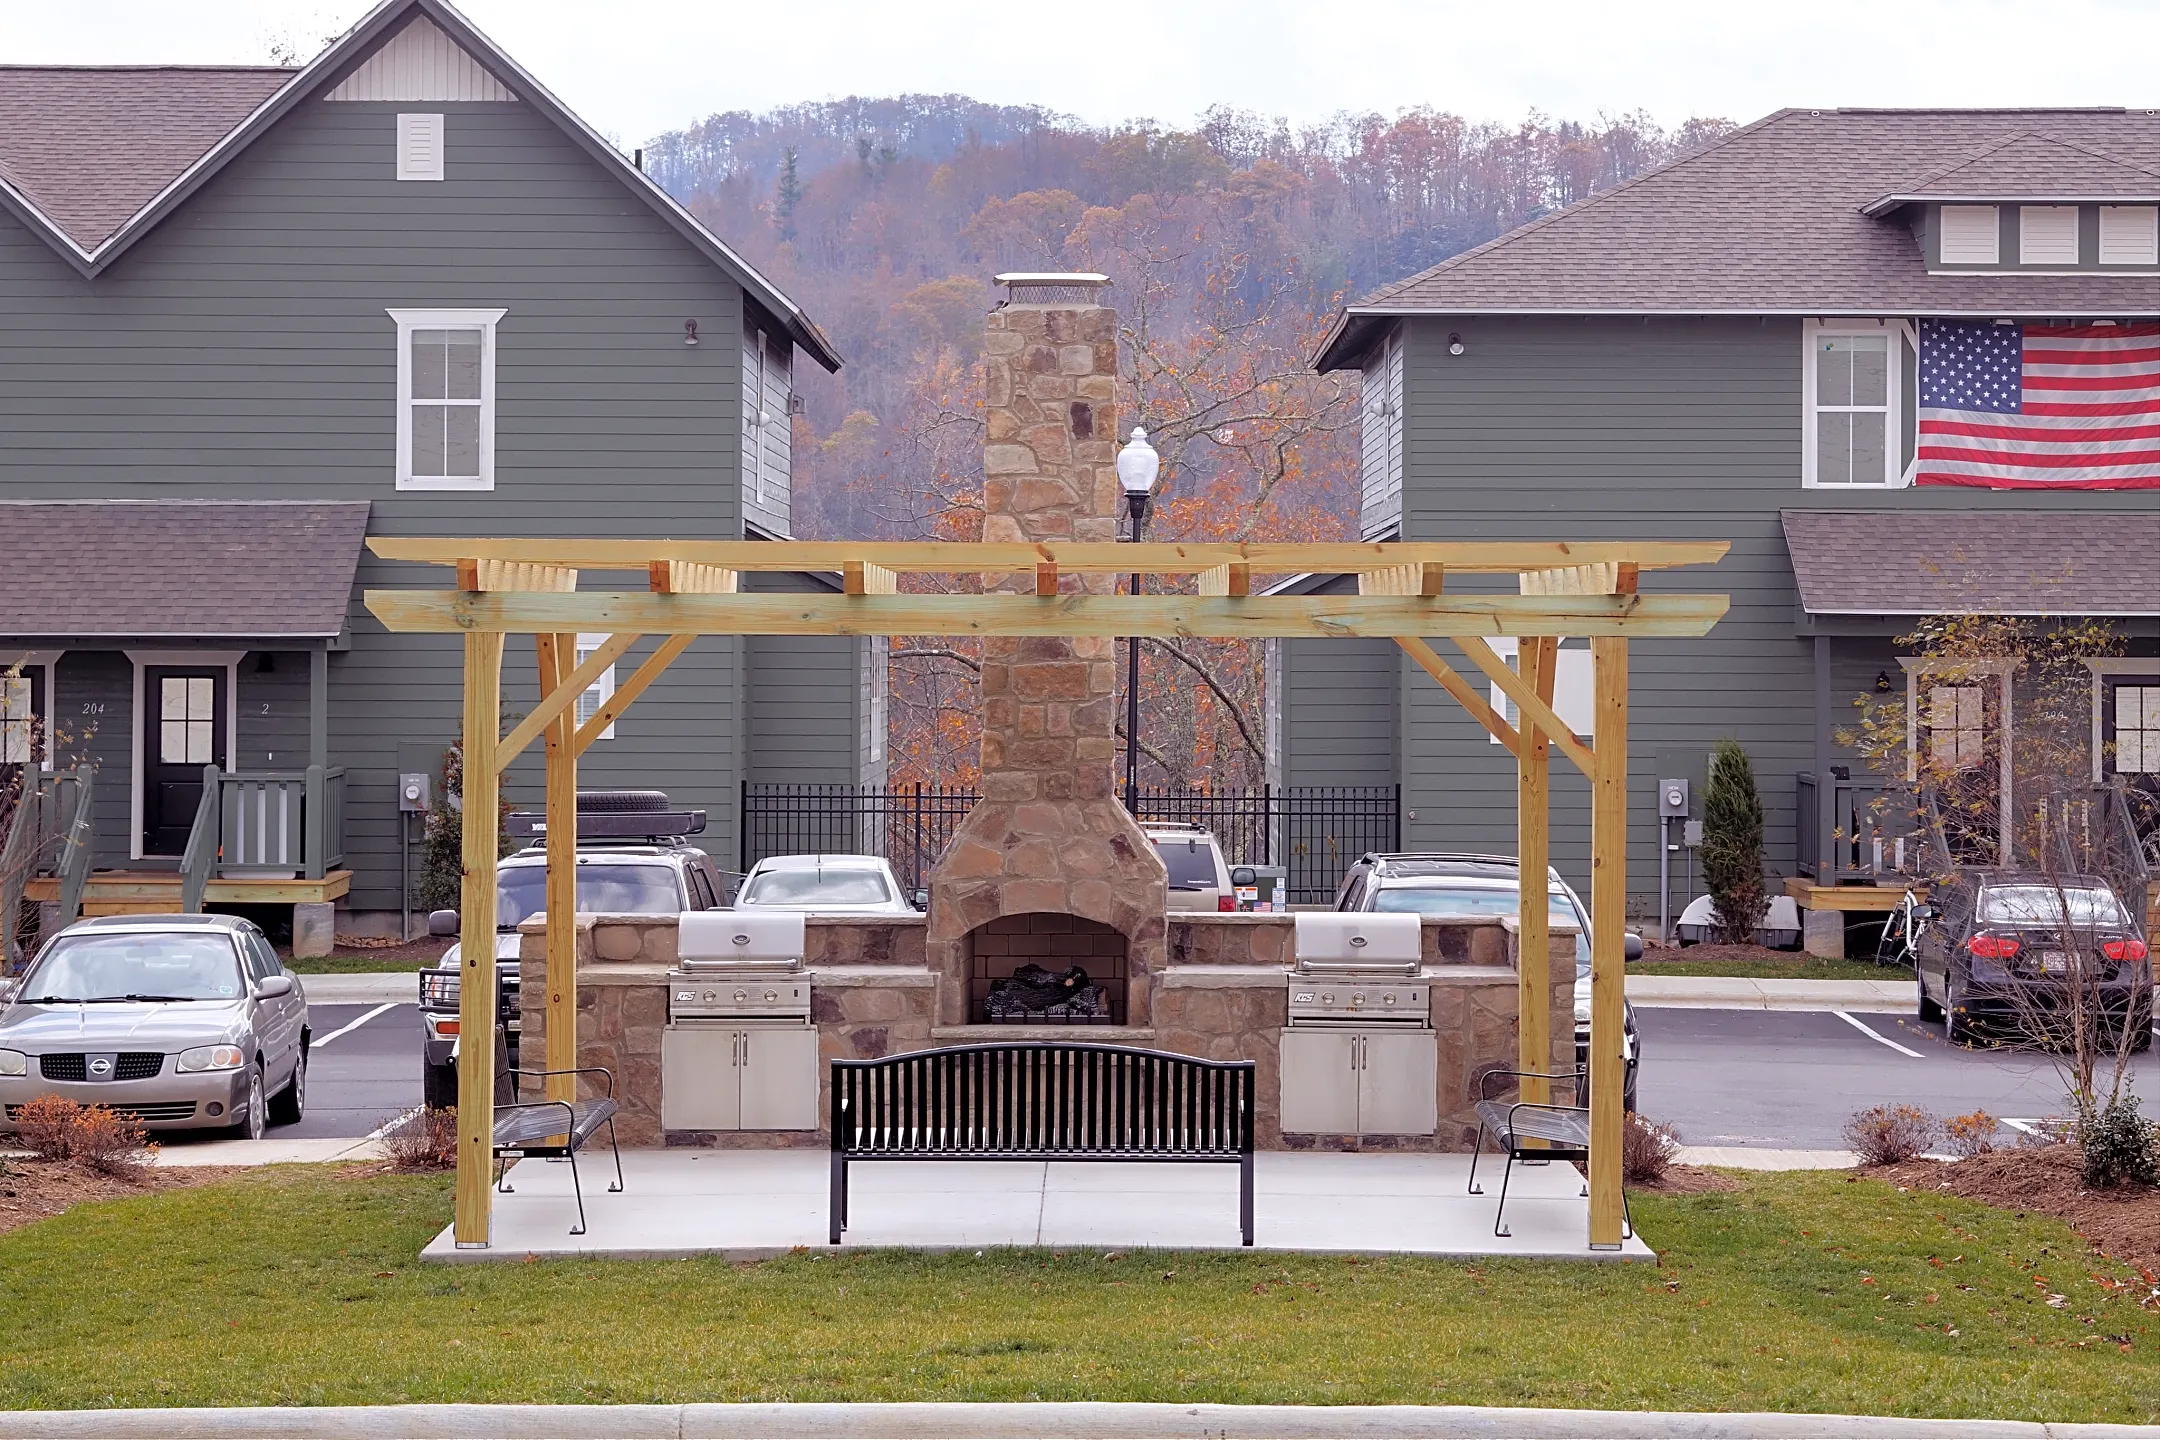 The Cottages of Boone - Per Bed Lease - Boone, NC